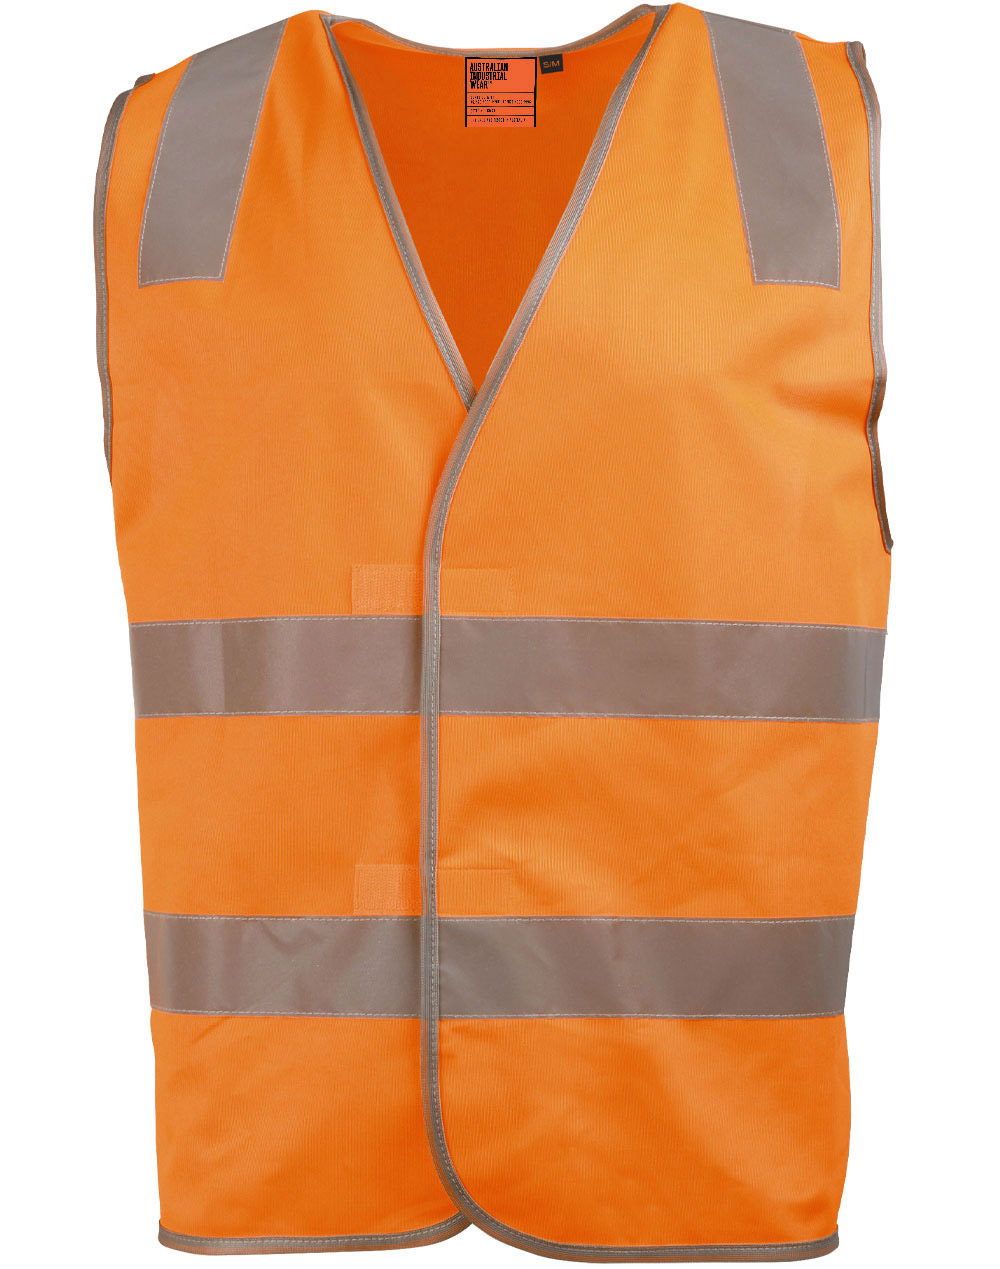 Hi-Vis Safety Vest with reflective tape Day/Night